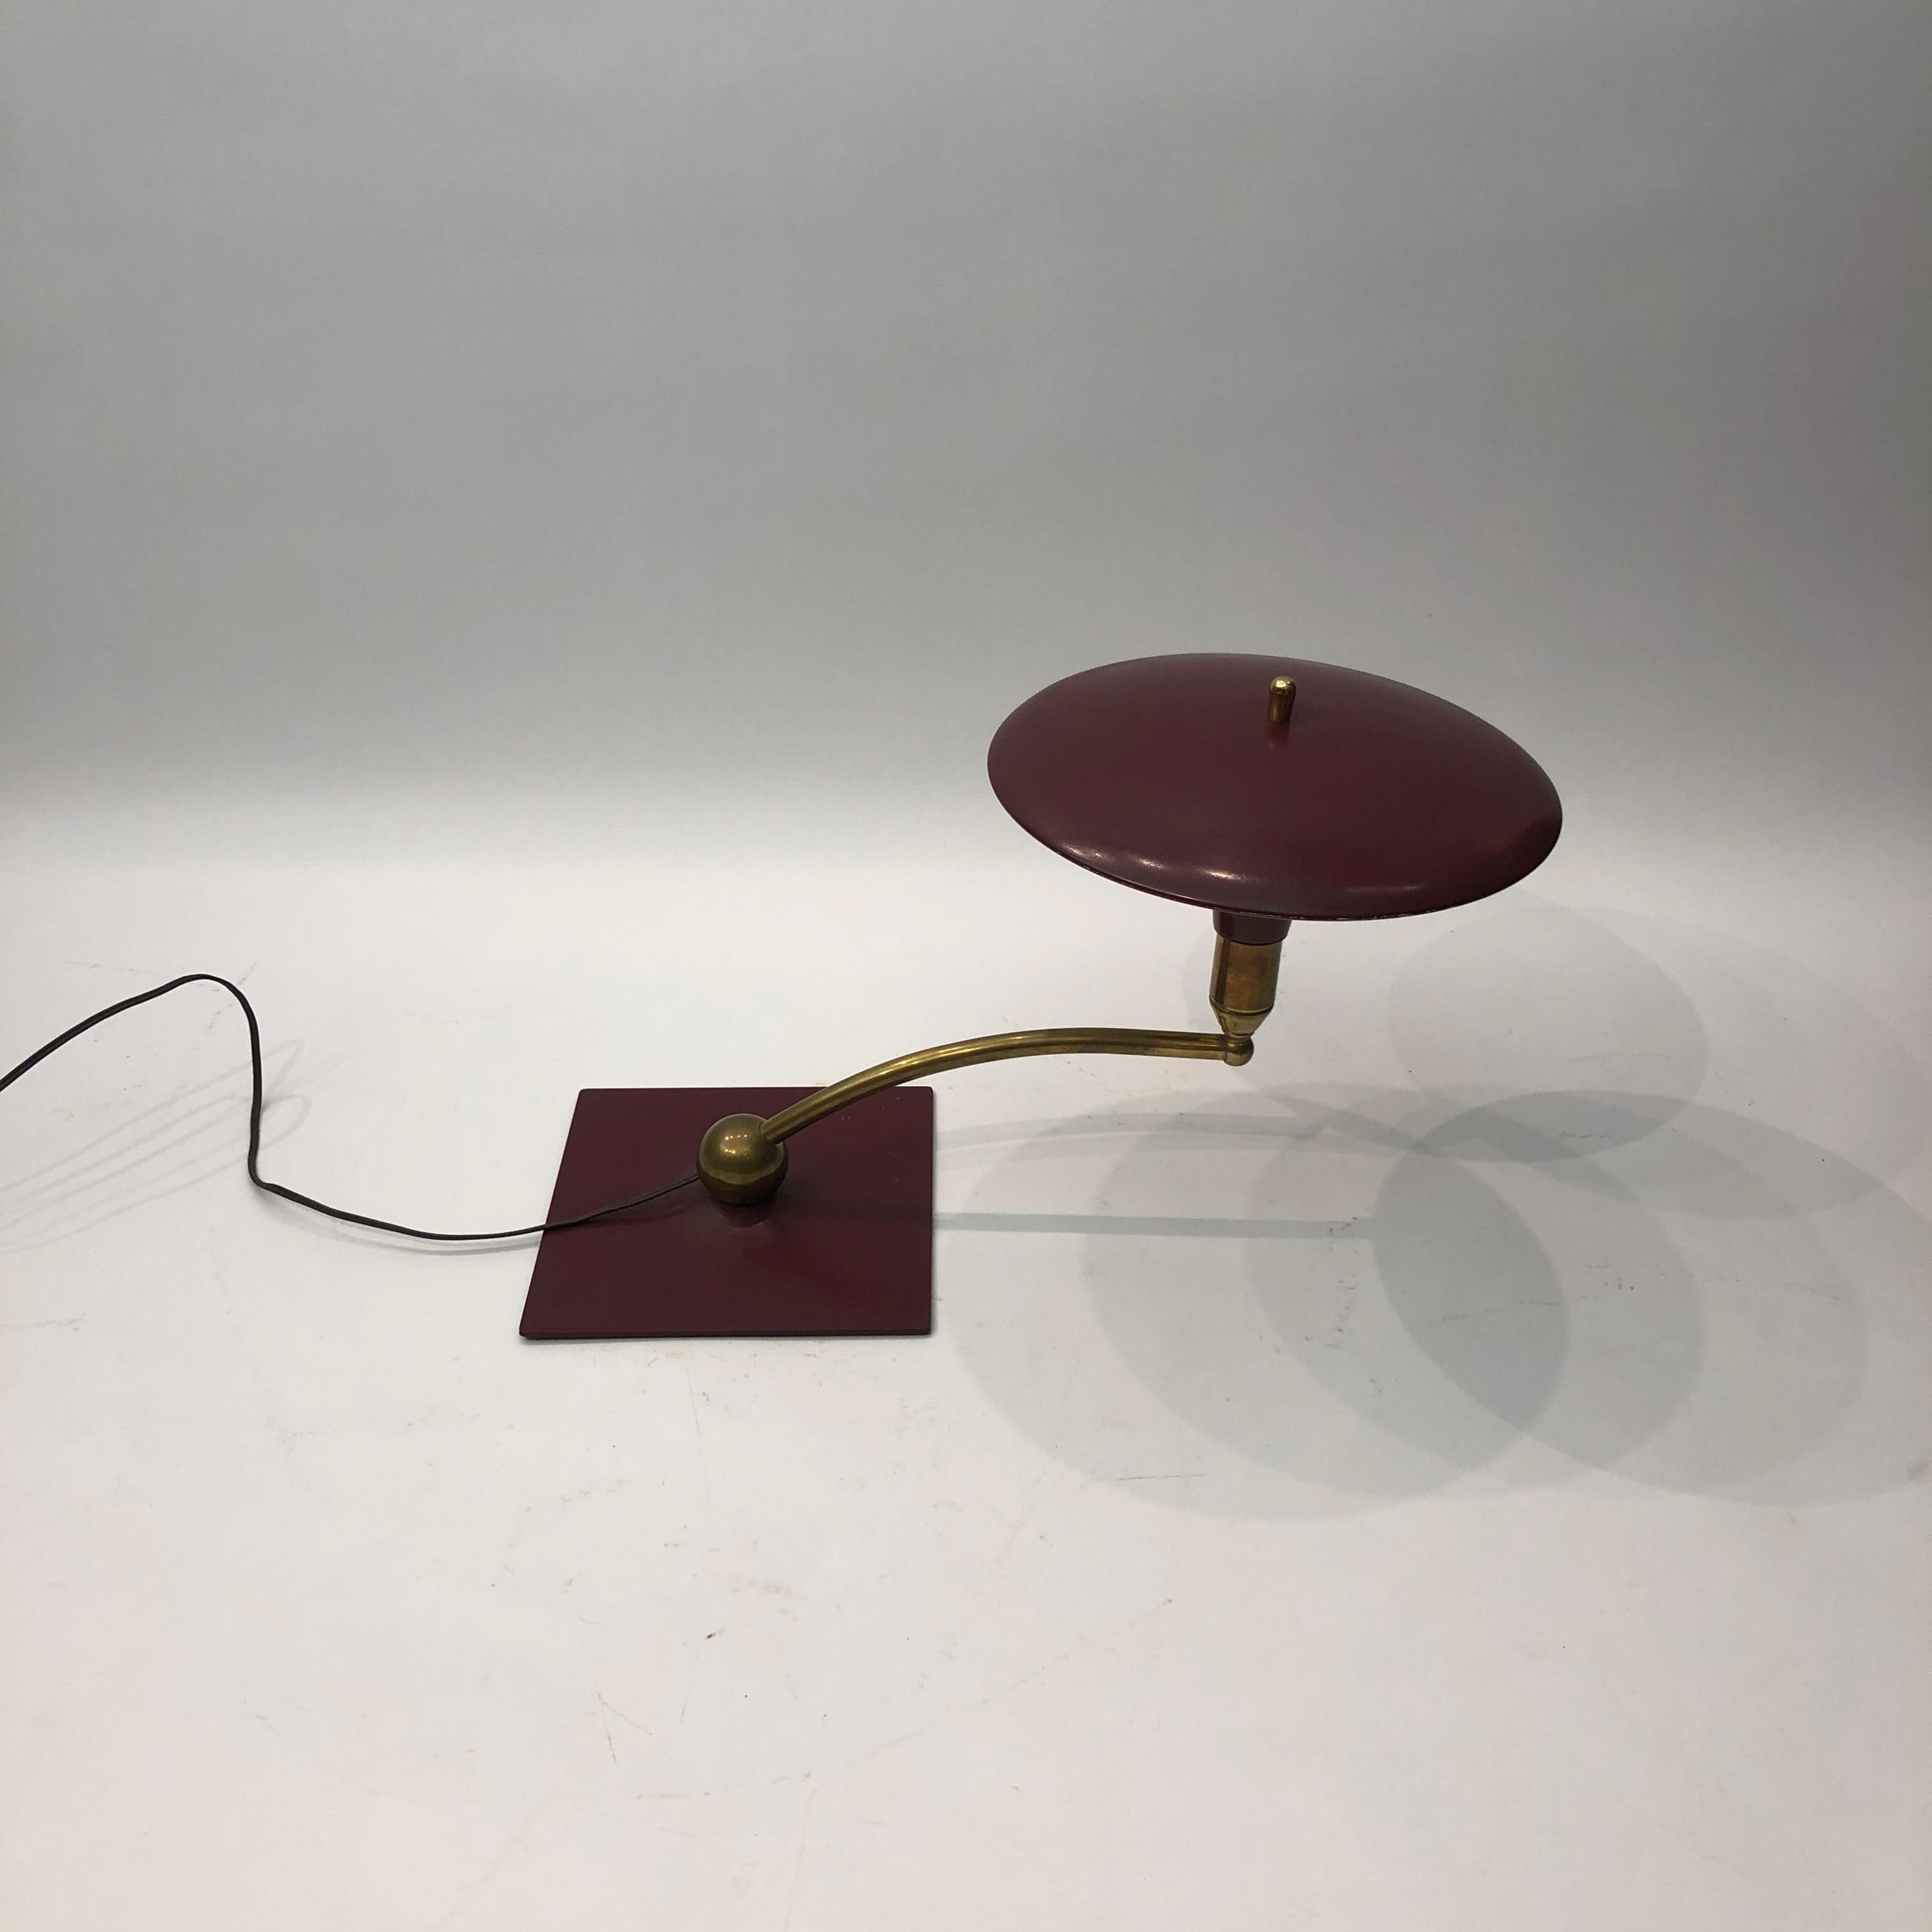 A classic desk table lamp by MG Wheeler in burgundy crackled finish and brass details. Steady heavy square base with a brass rotating ball with a curved pole that supports the UFO like shade. Elements of 1950s futurism and is evident on this classic